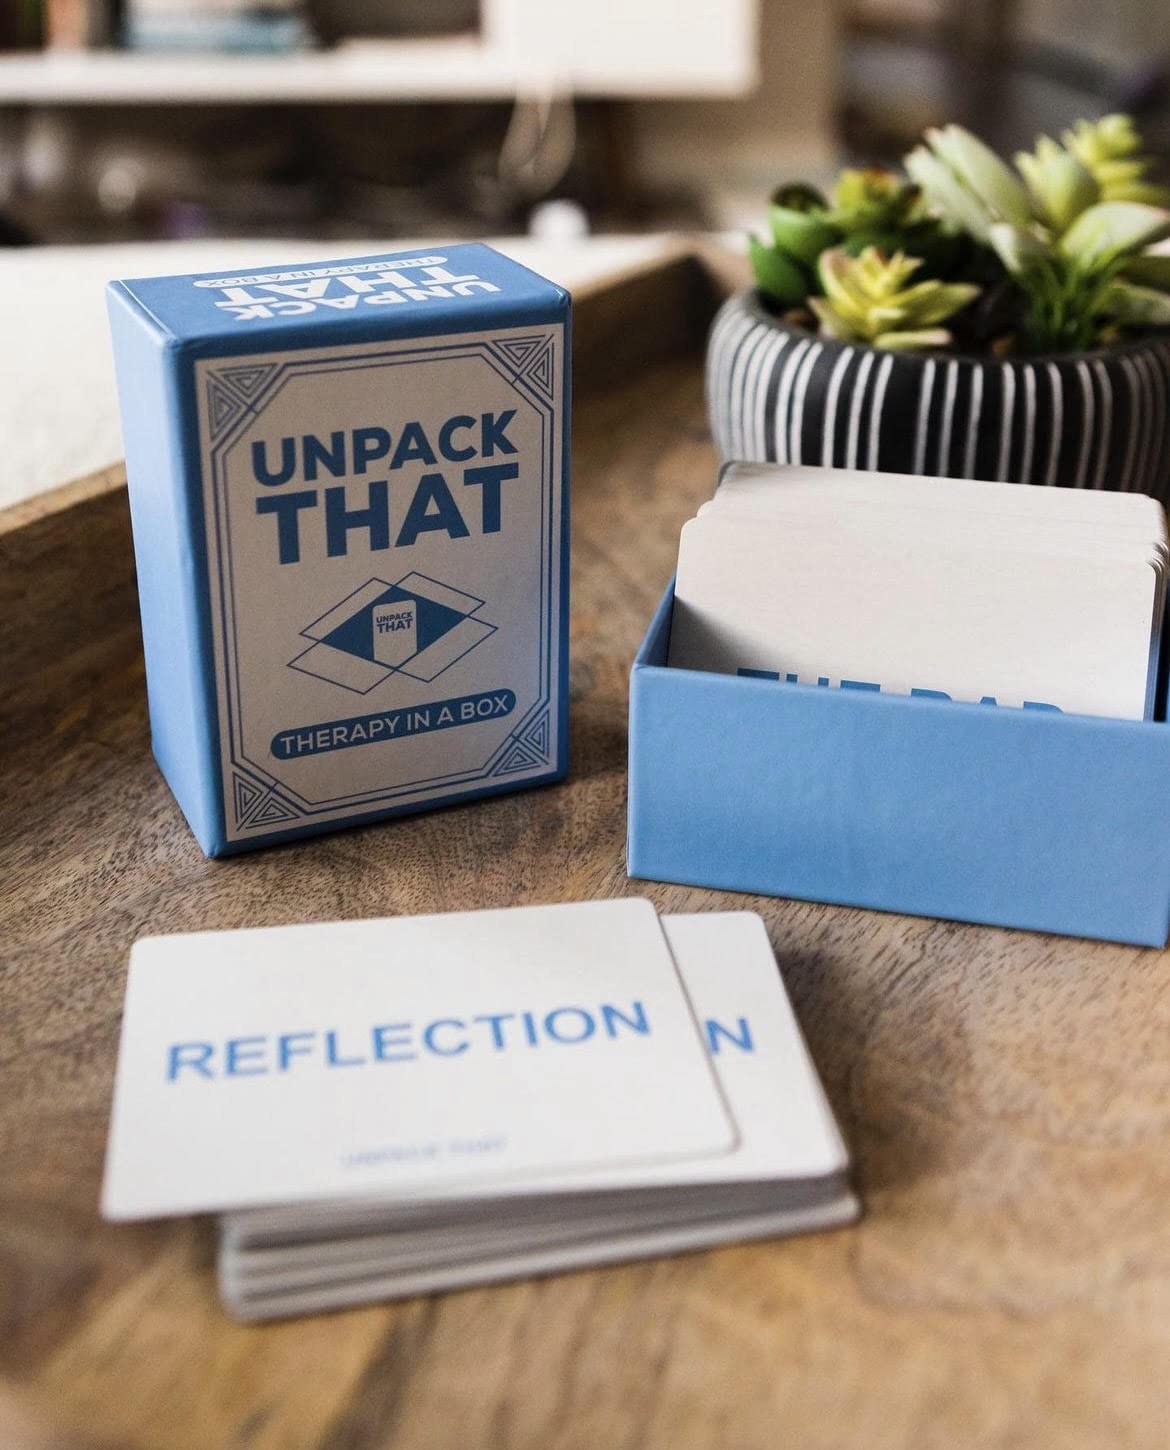 UNPACK THAT Therapy in a Box Couples and Family Card Game Meaningful Cards for Connecting on a Deeper Level with Loved Ones… (Core Game